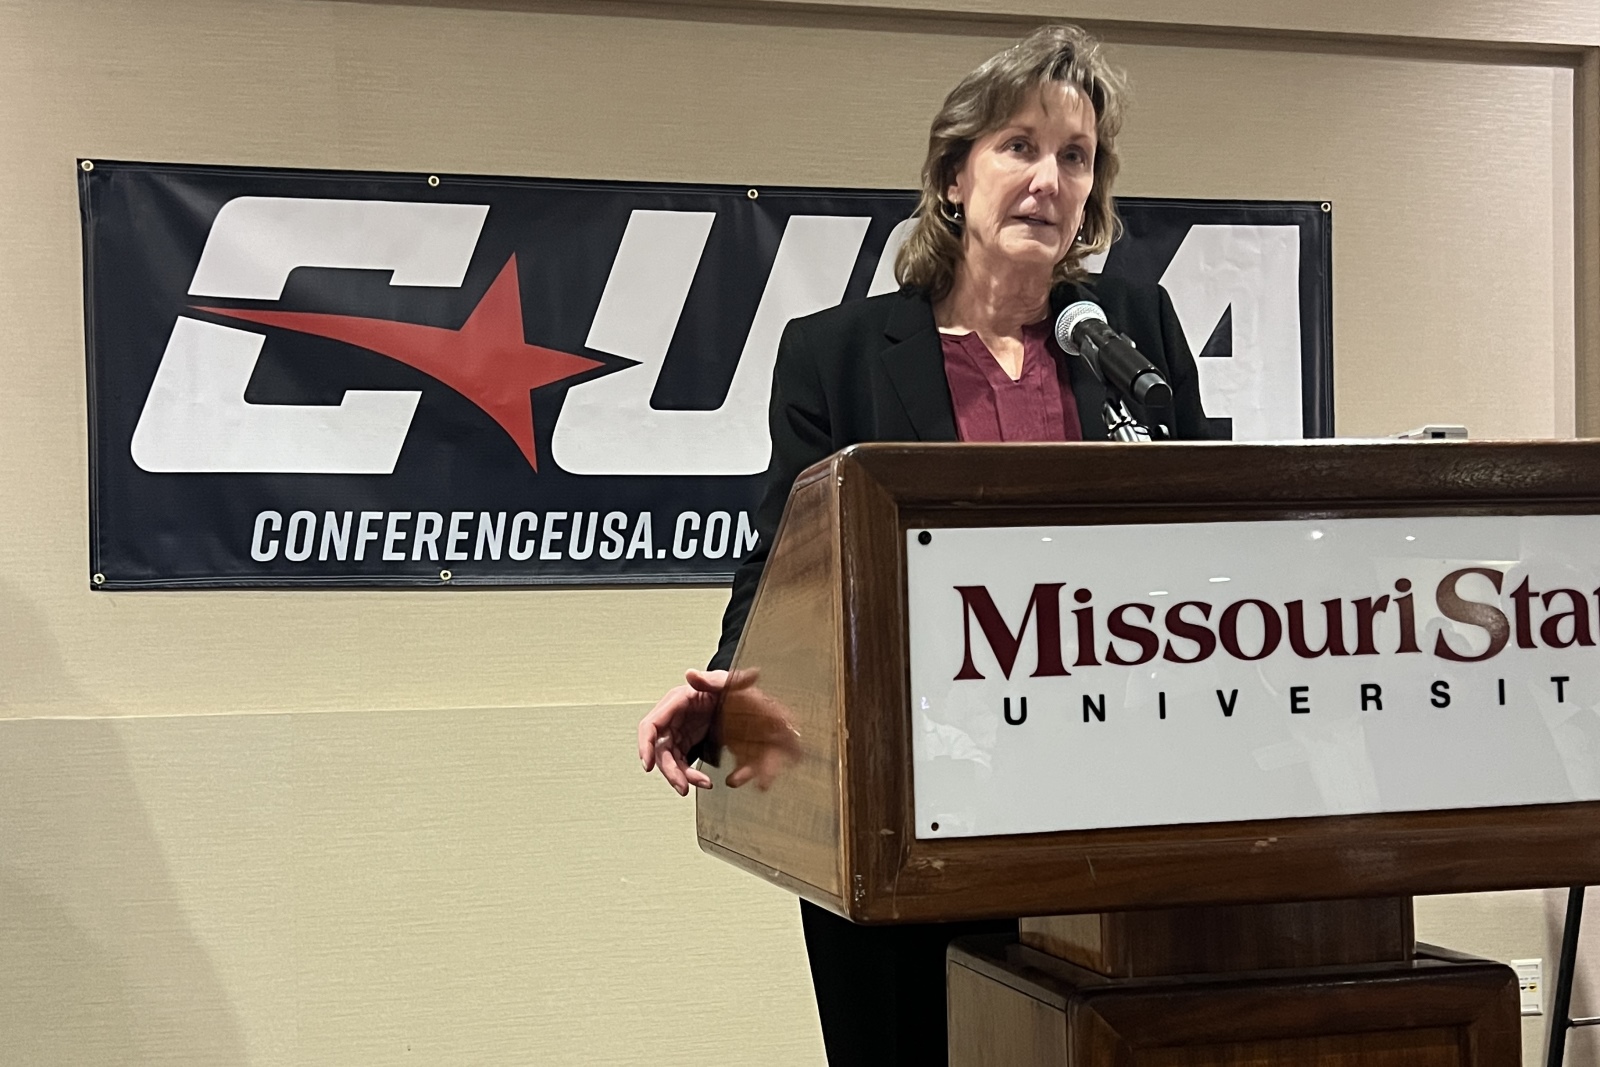 Judy MacLeod, commissioner of Conference USA, stands behind a podium with a sign reading "Missouri State University" and in front of a blue banner with the Conference USA logo printed on it.